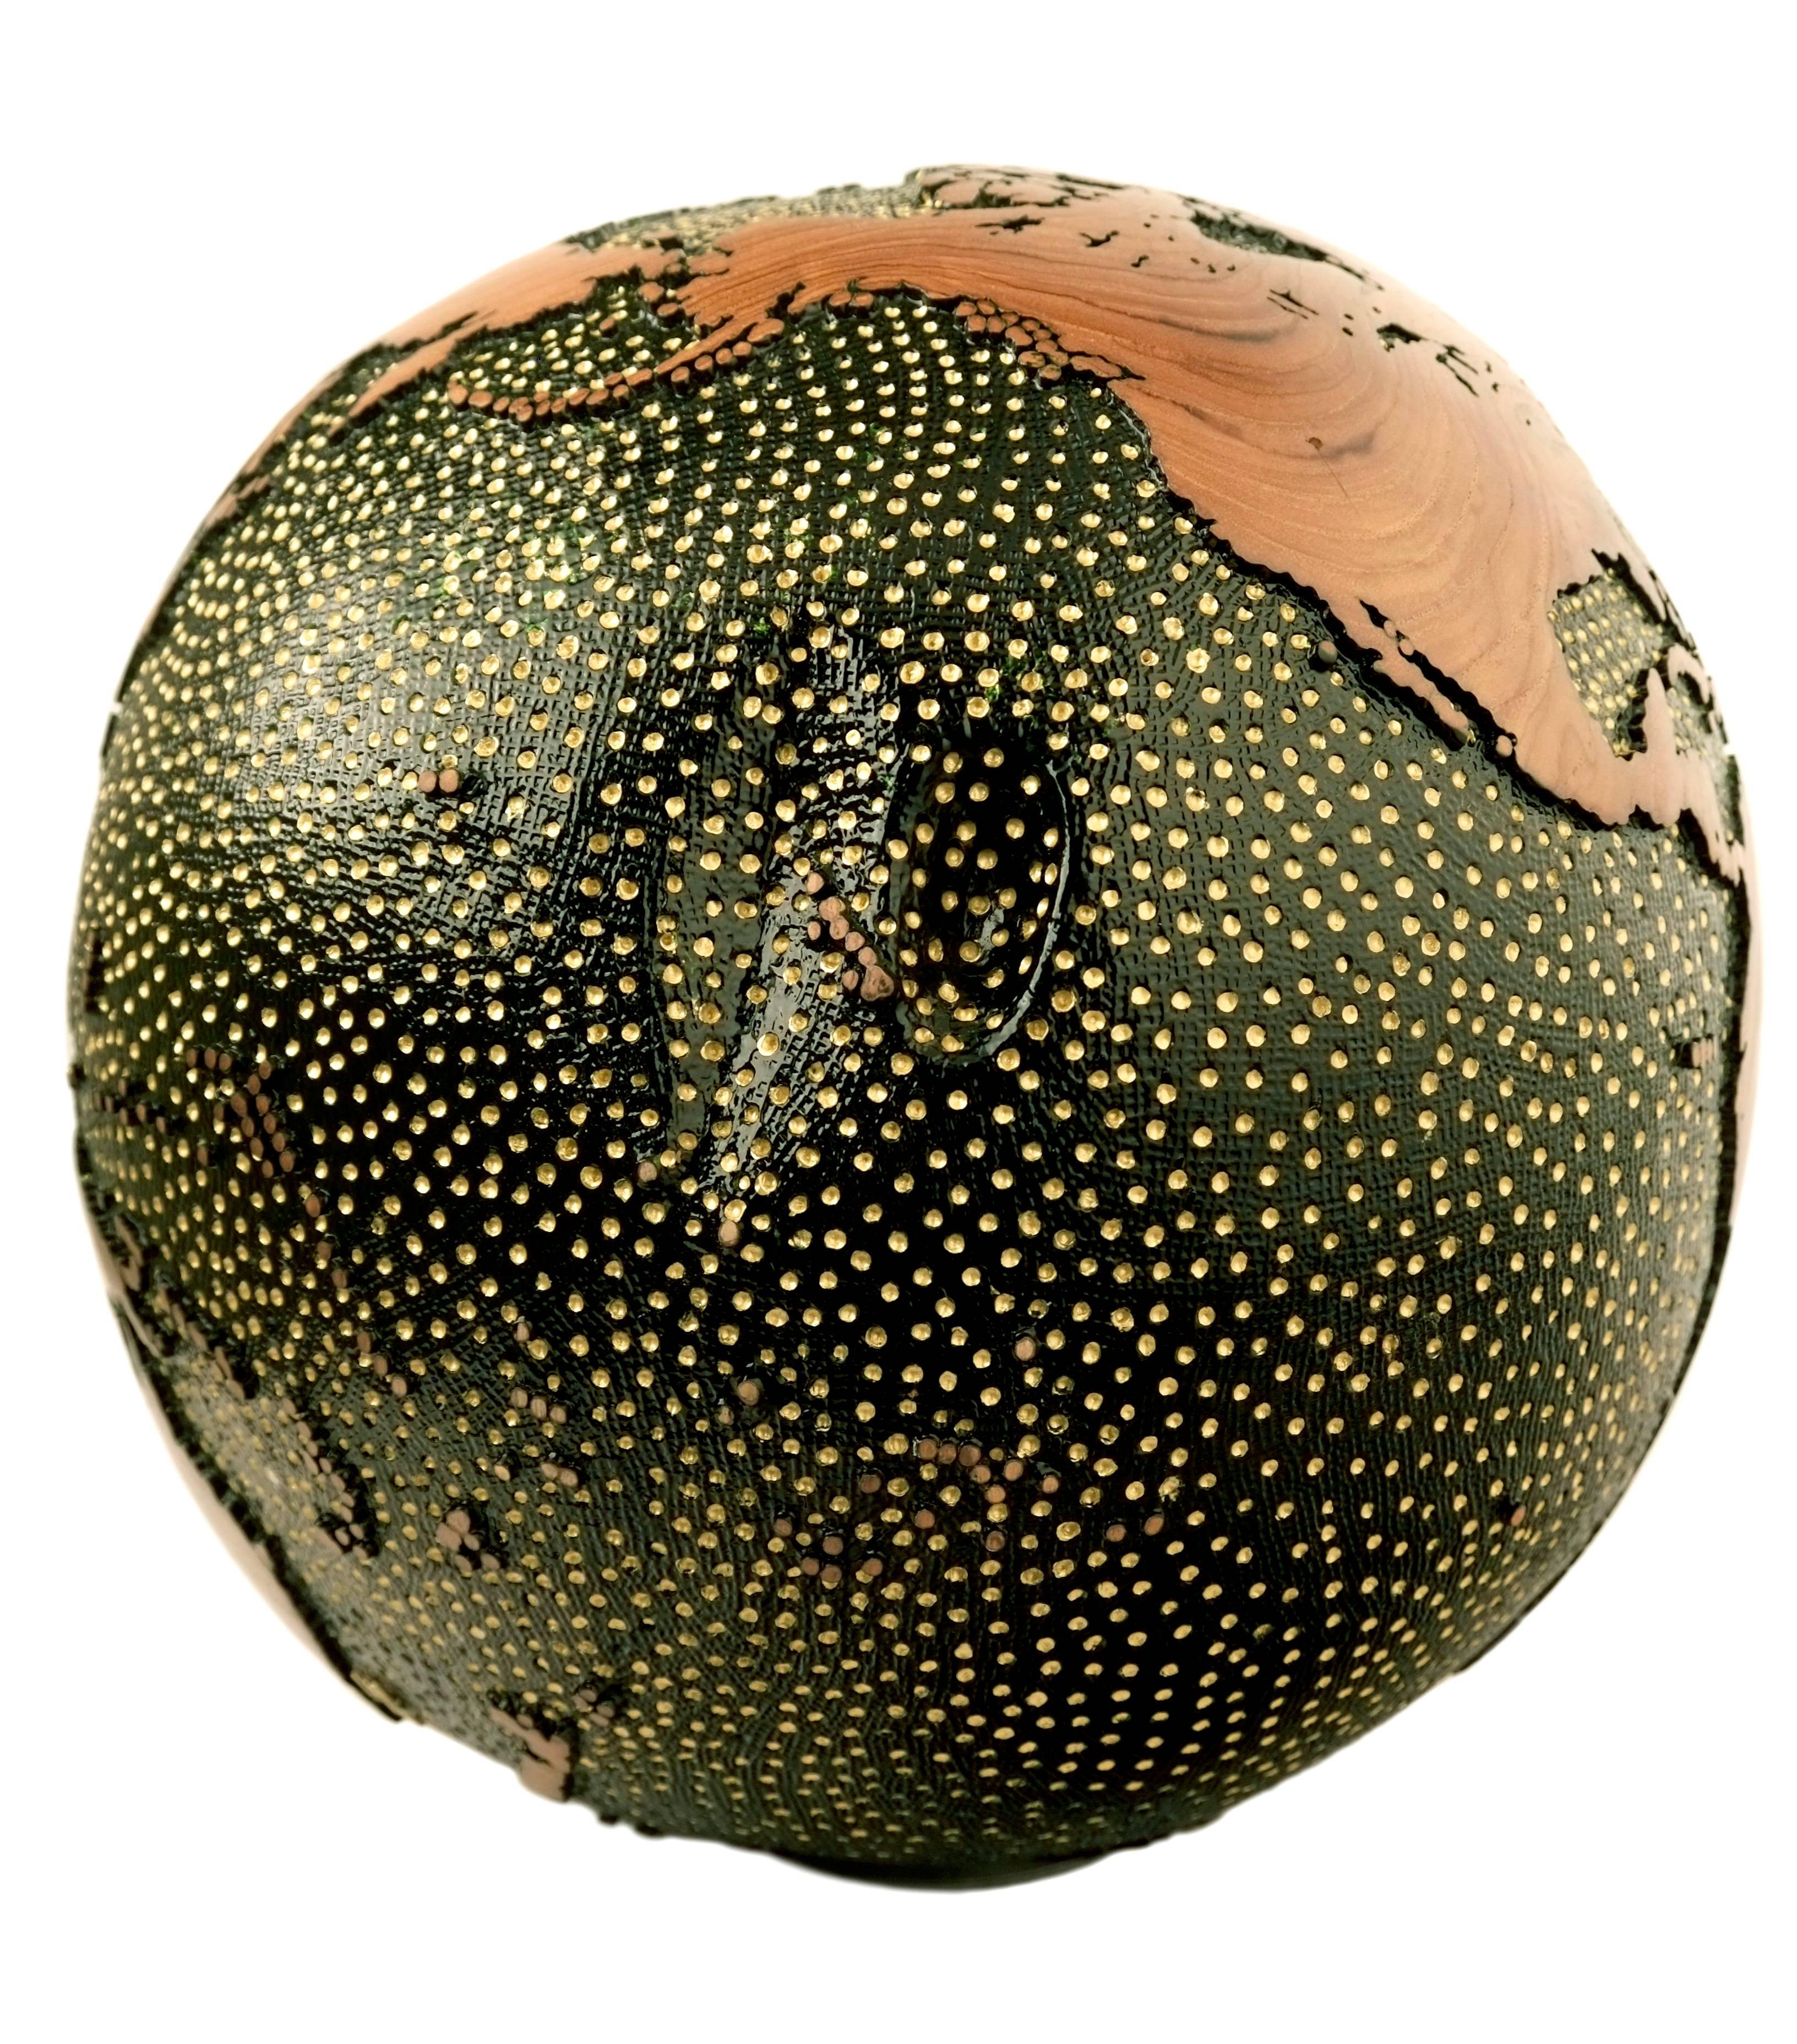 Balinese Earth Stars Globe, made of teak root, vitrail, gold paint, hammered texture 30cm